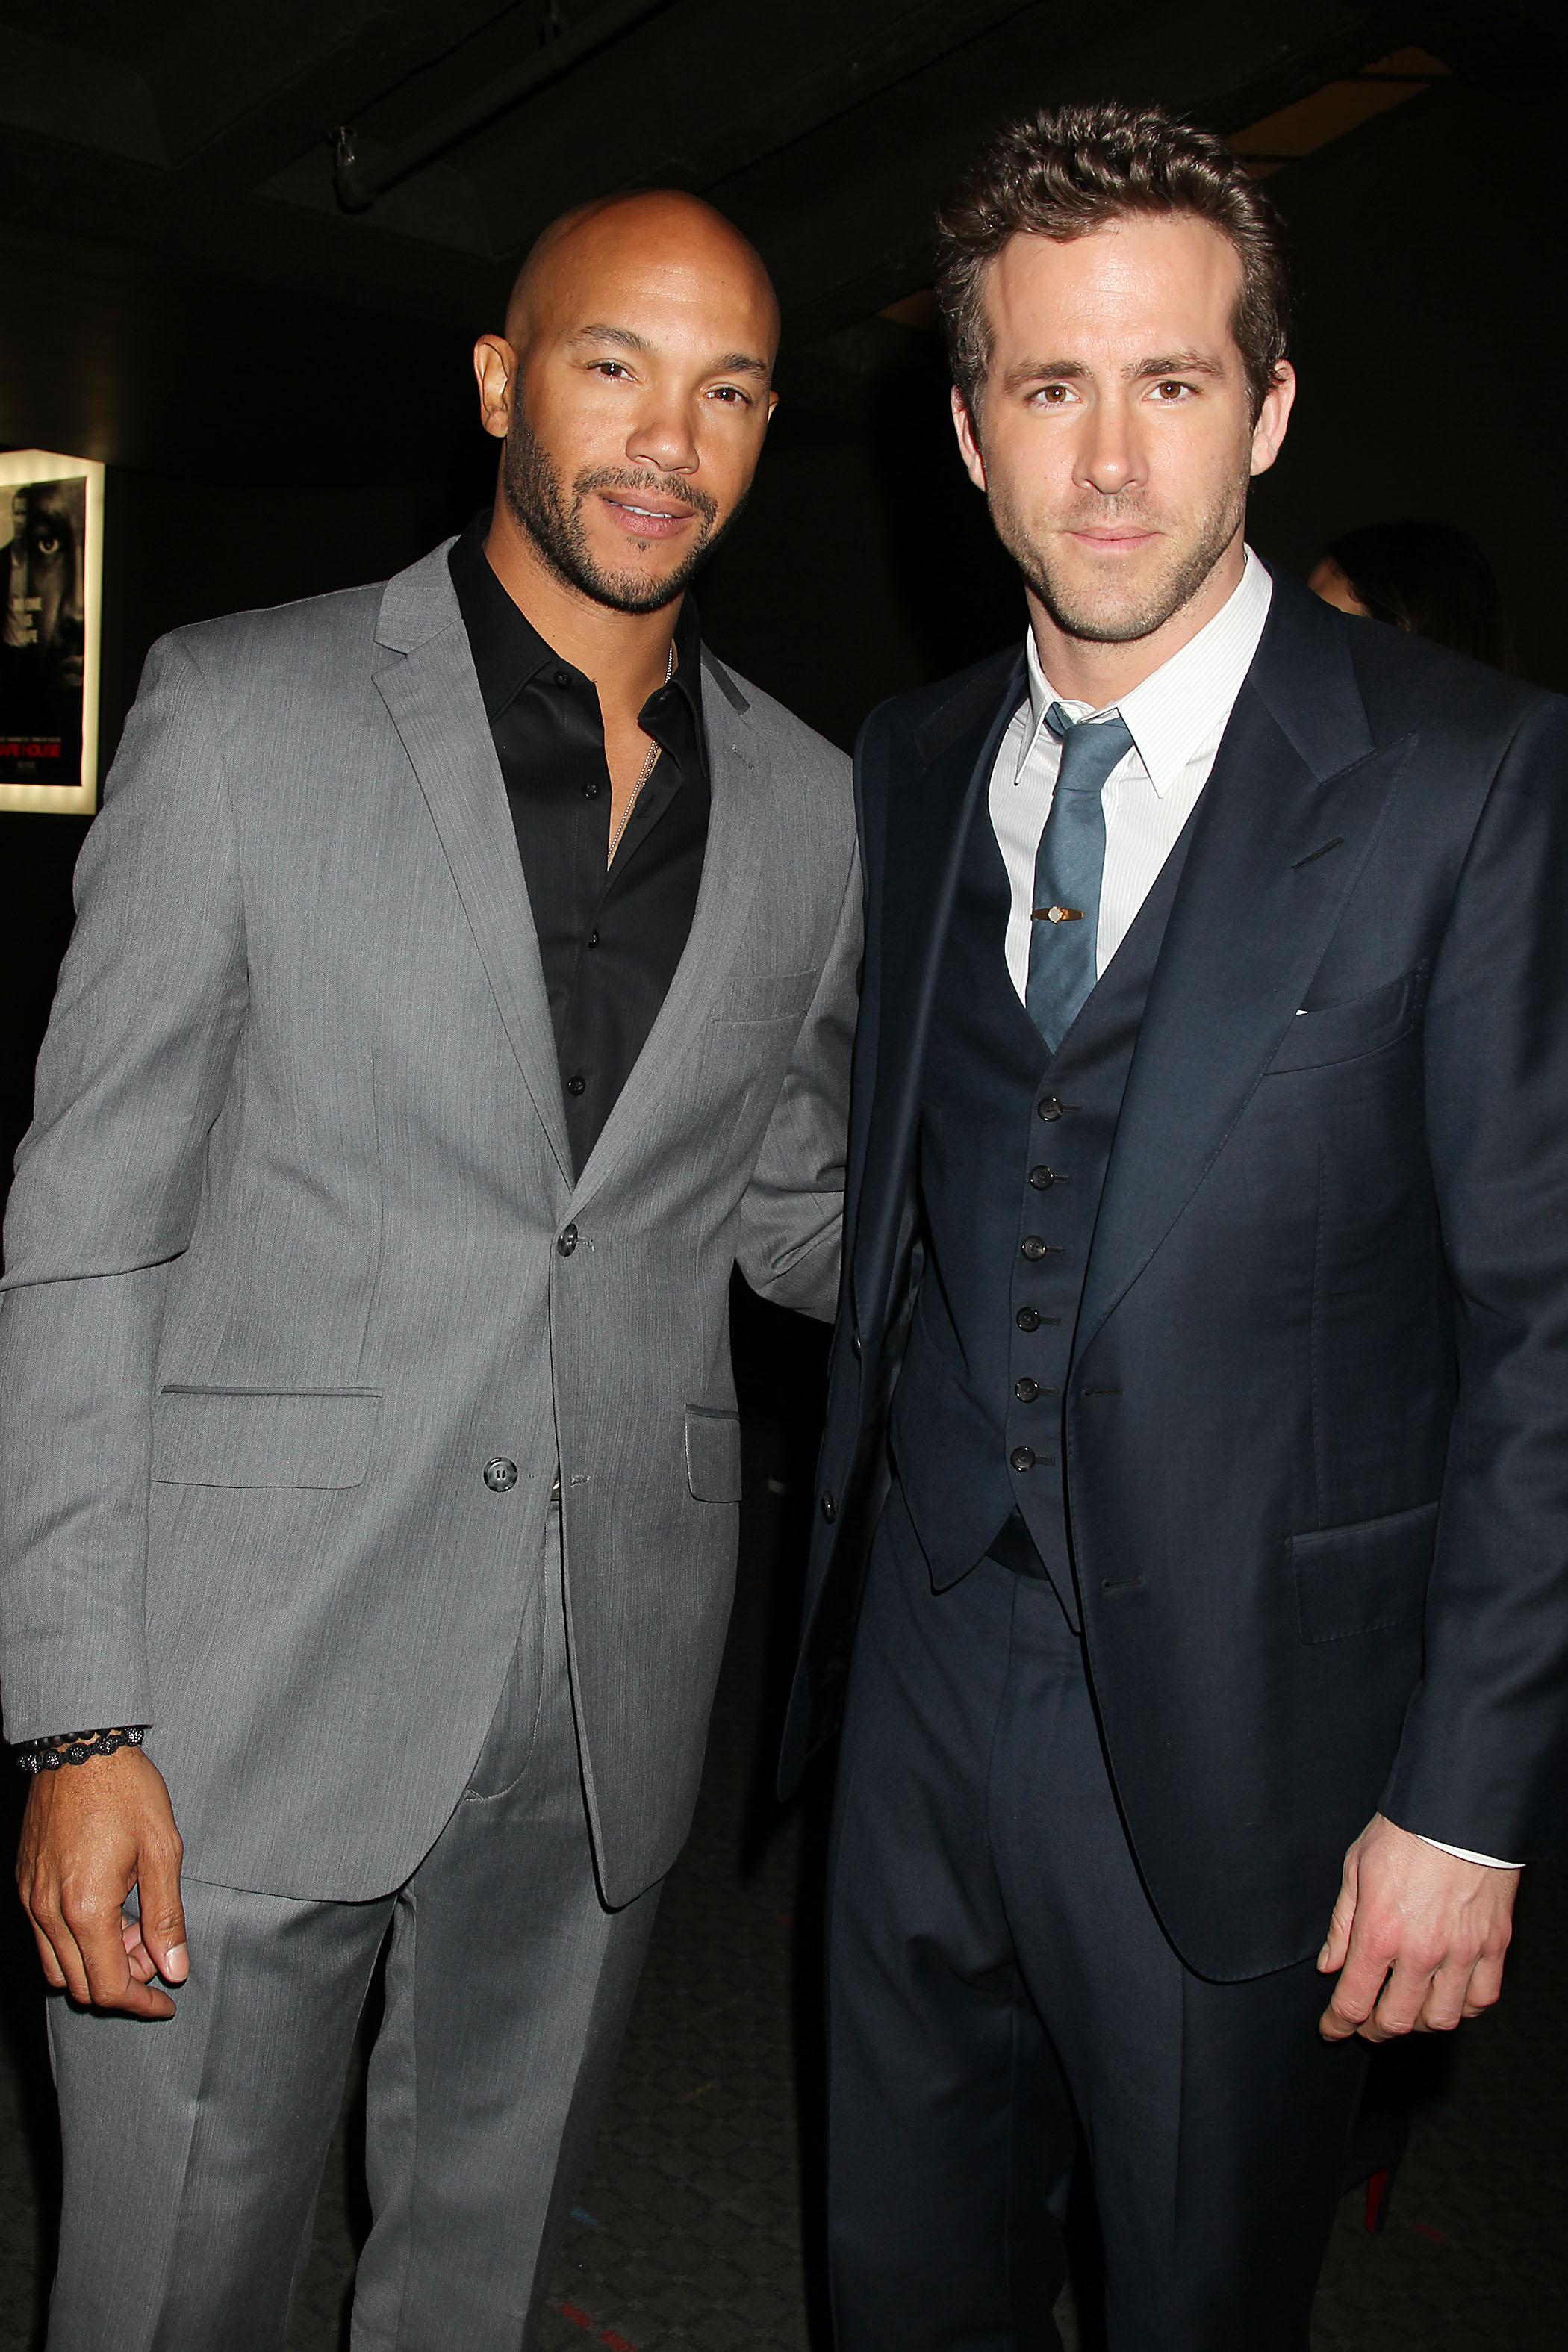 Stephen Bishop and Ryan Reynolds arrive at the Safe House World Premiere in New York City.